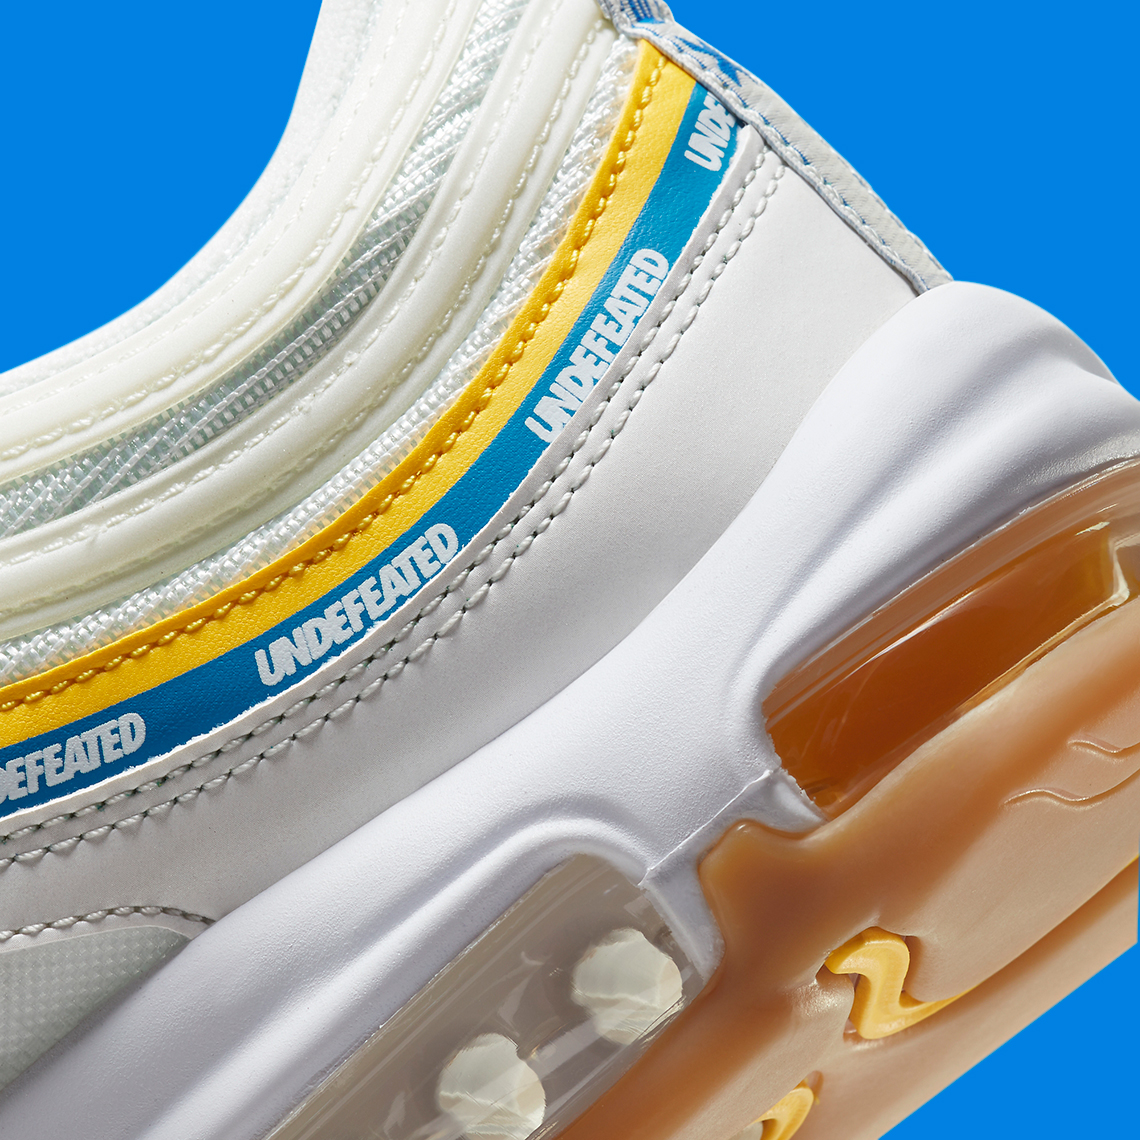 Undefeated Nike Air Max 97 Sail Aero Blue Midwest Gold DC4830-100 